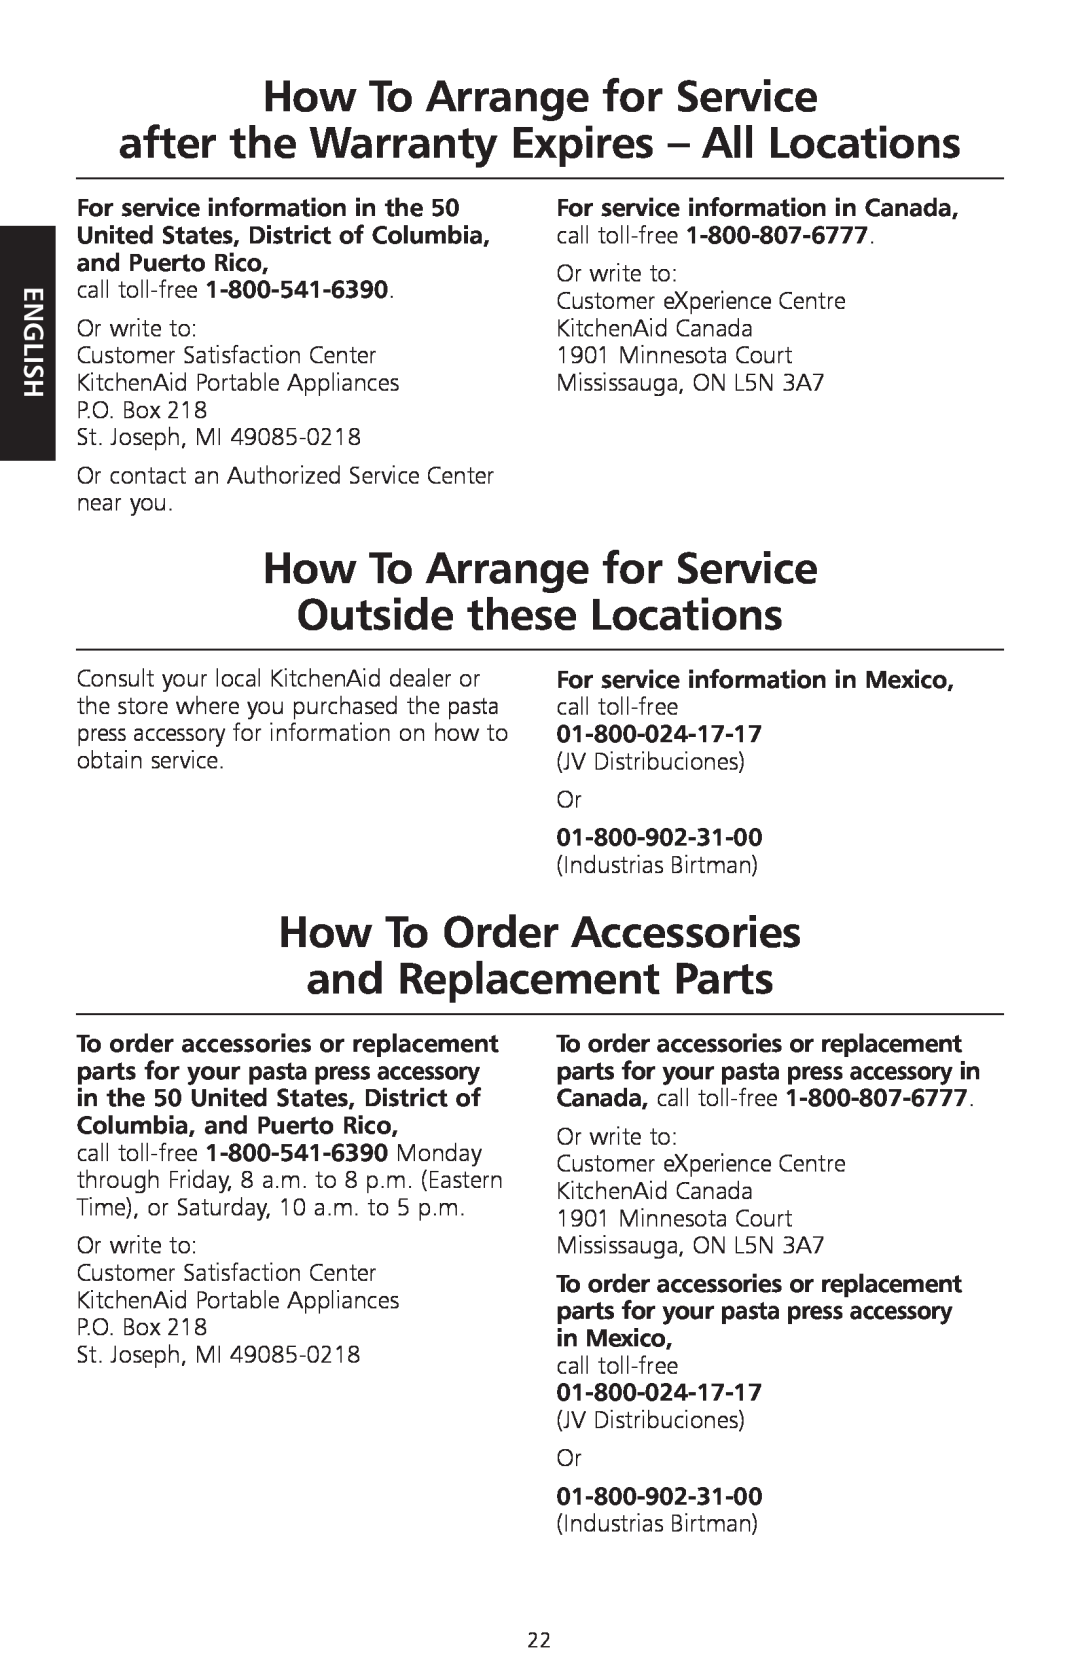 KitchenAid W10236413B manual How To Arrange for Service after the Warranty Expires - All Locations, English 